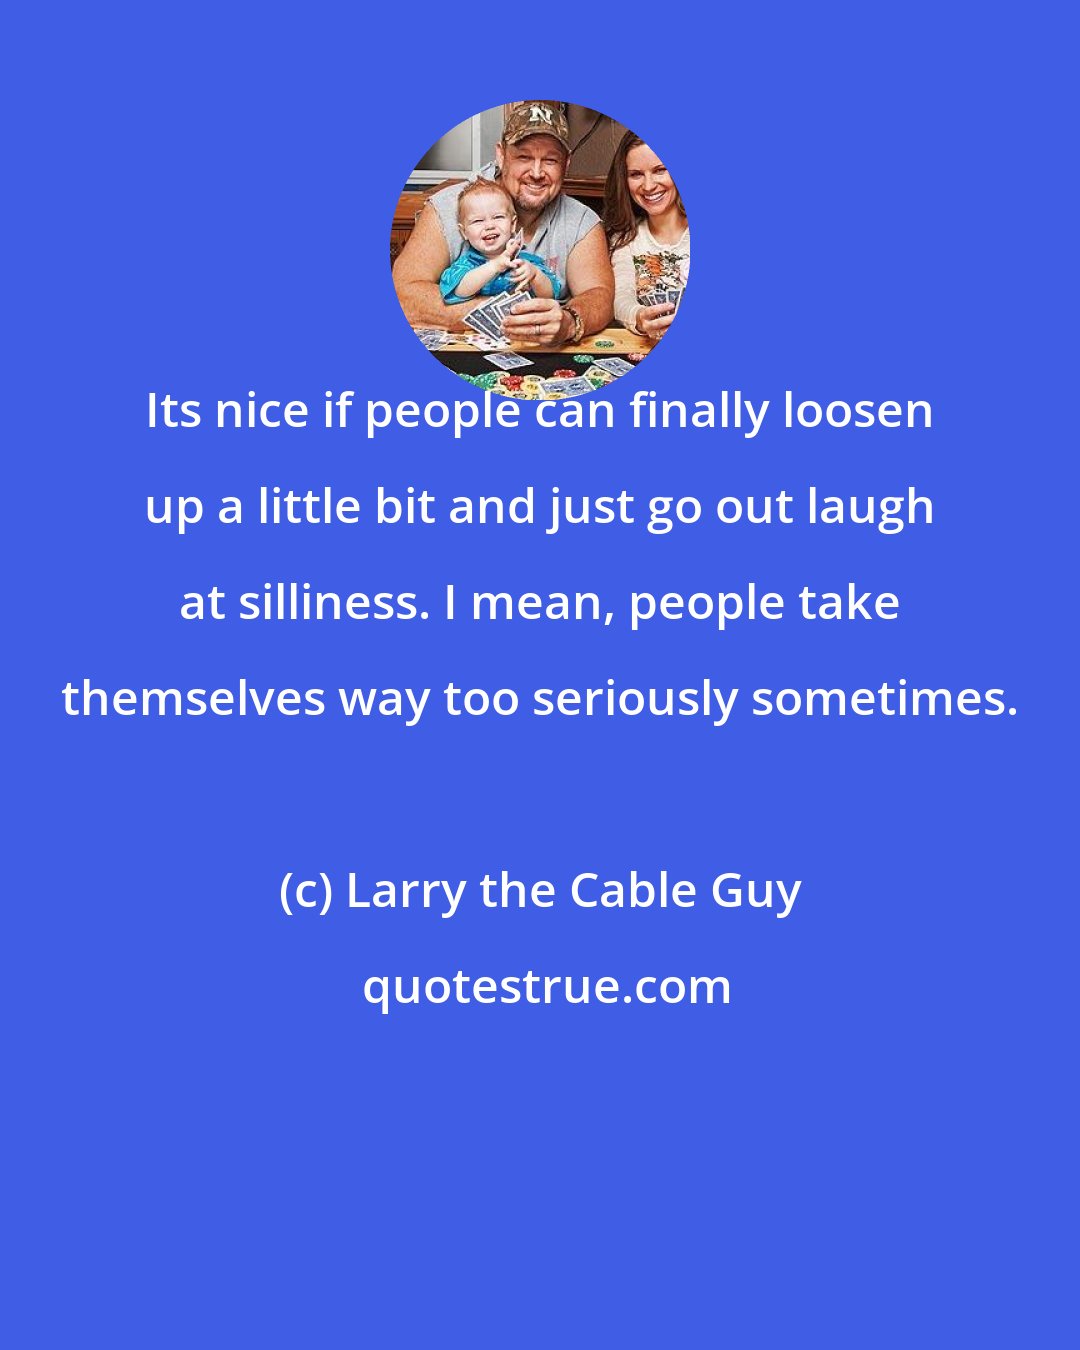 Larry the Cable Guy: Its nice if people can finally loosen up a little bit and just go out laugh at silliness. I mean, people take themselves way too seriously sometimes.